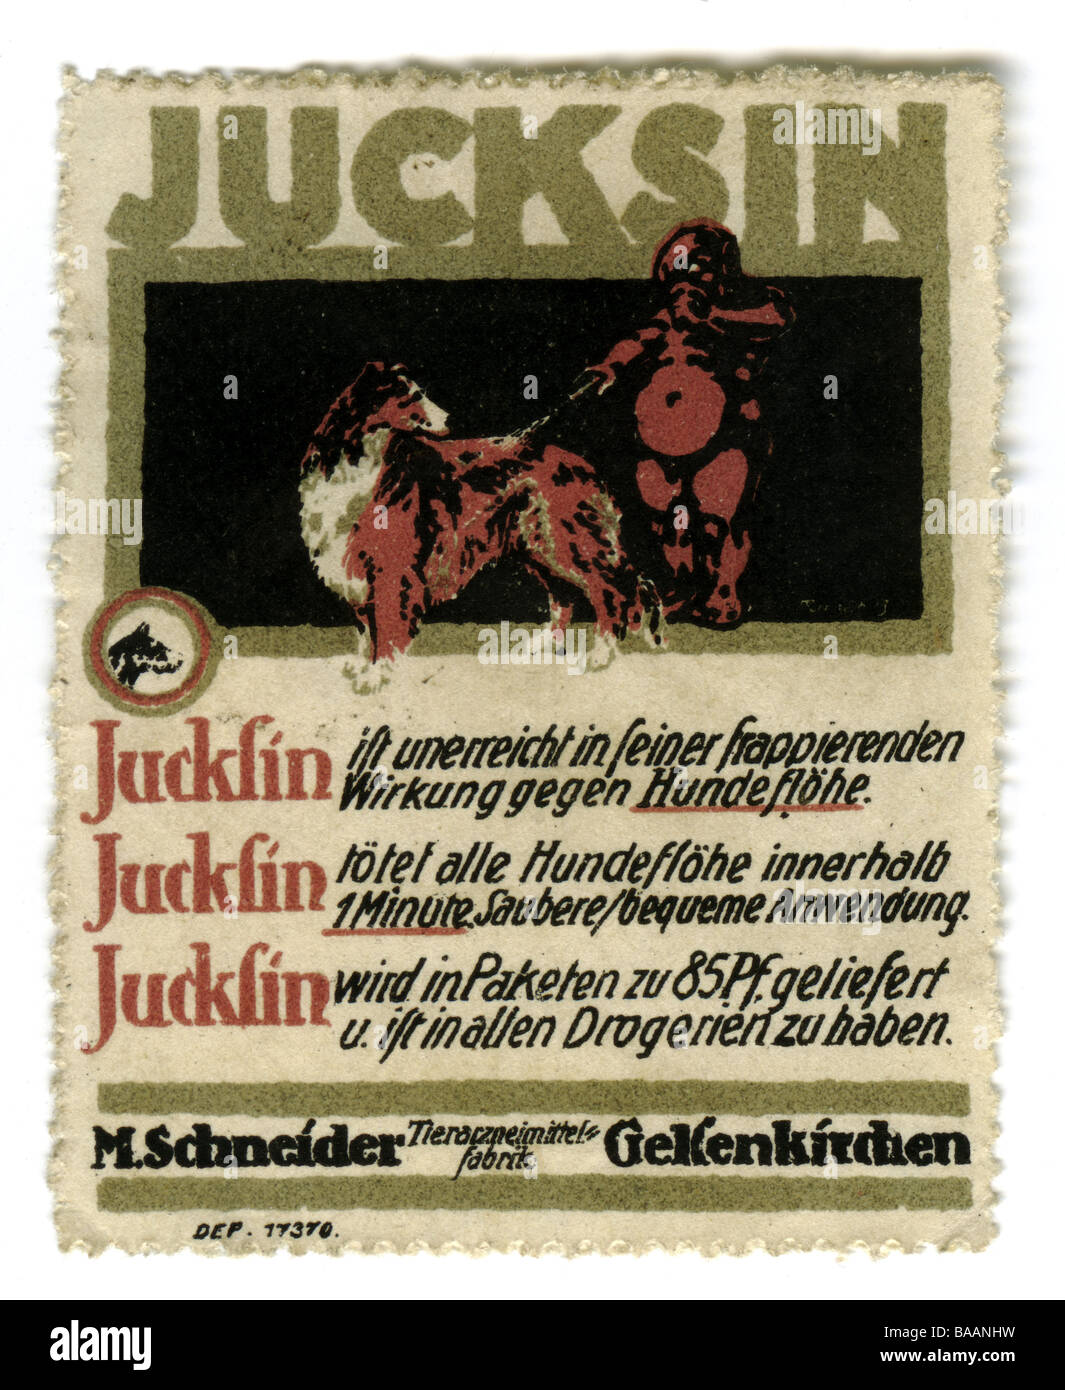 advertising, stamps, Jucksin, against dog flea, Germany, circa 1910,historic, historical, stamp, clipping, Schneider, Gelsenkirchen, 20th century, people, 1910s, Stock Photo